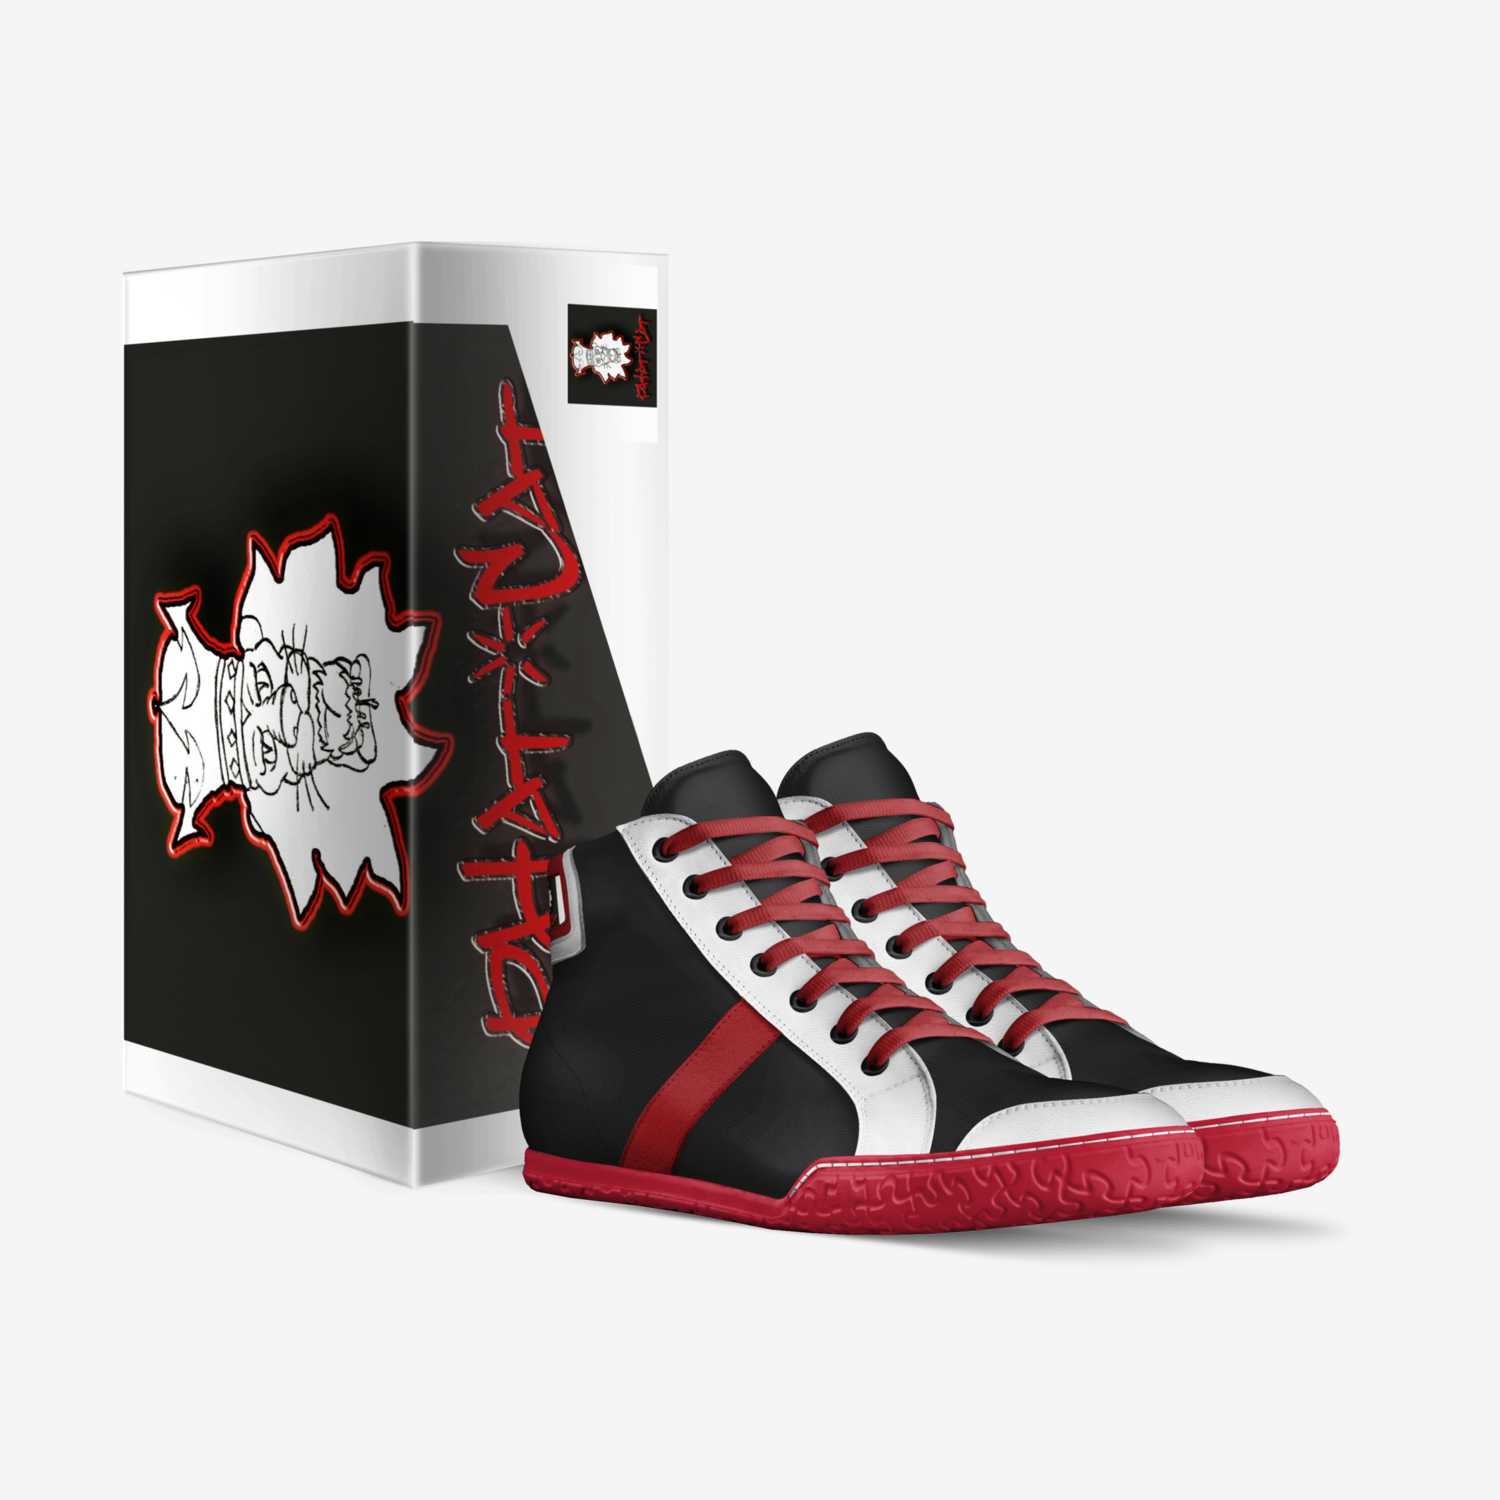 FlyLyf(PhatCatEdition) custom made in Italy shoes by Robert Wynder | Box view